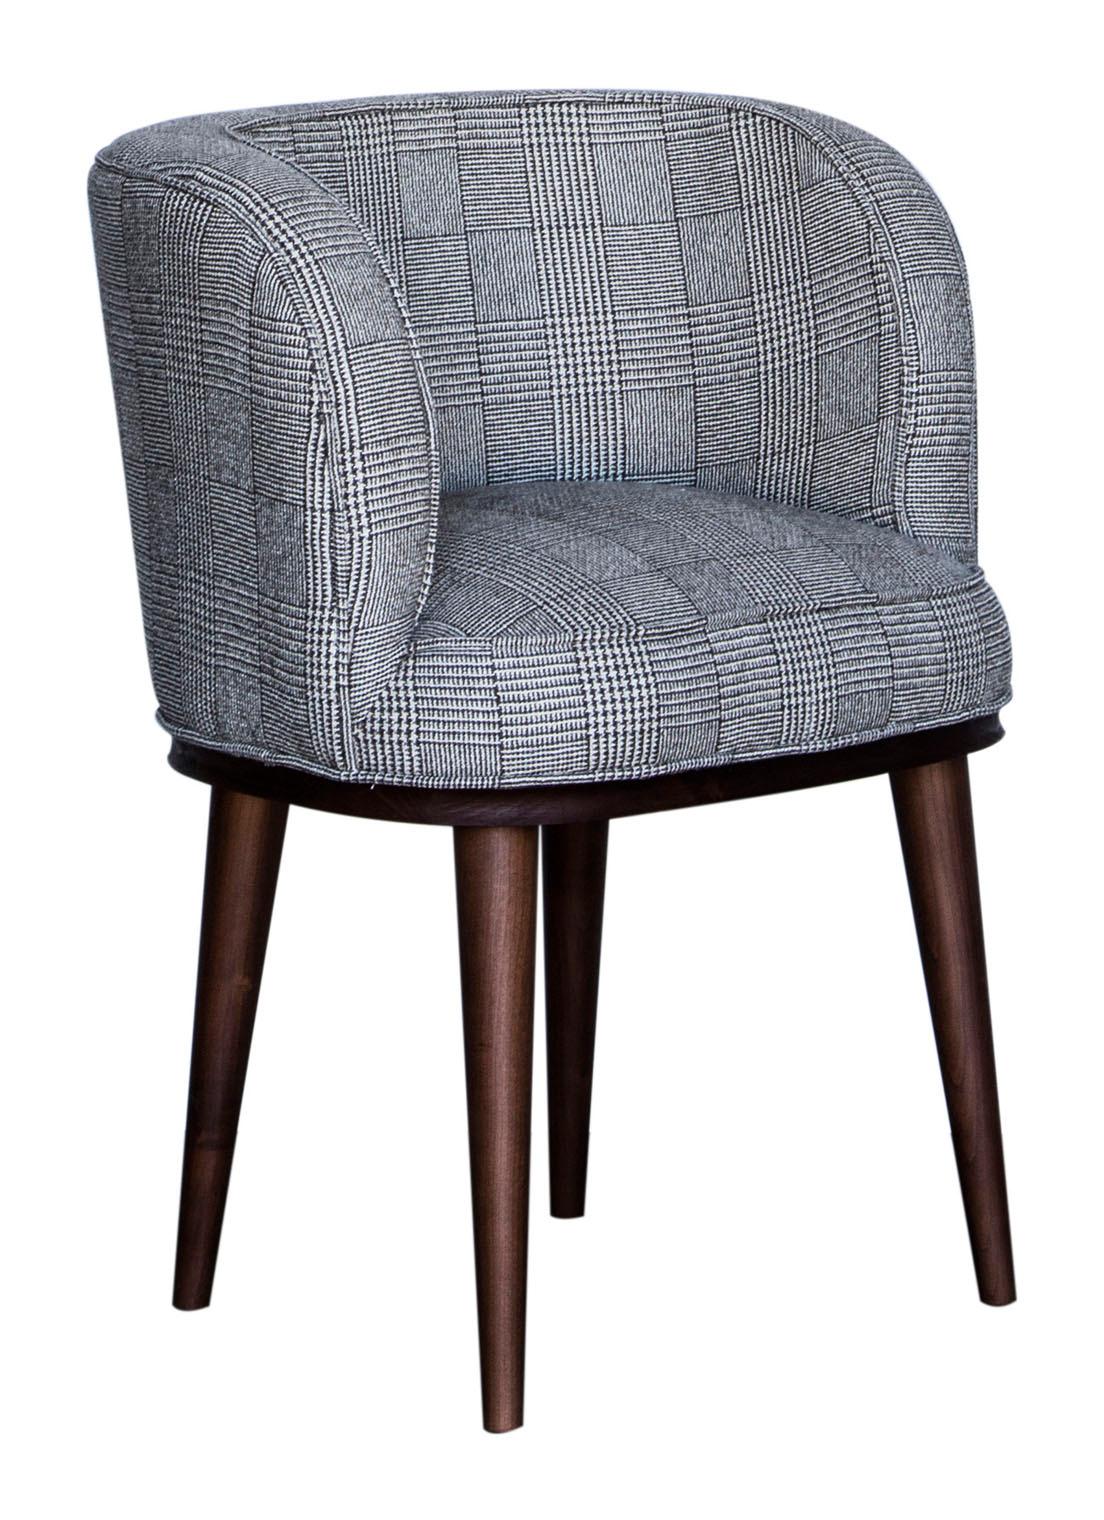 Our comfortable easy chair works just as well in an elegant drawing room as it does around your dining table or next to your desk. 
?
Available in different woods or varnished in a colour of your liking. Upholstered in a wide selection of fabrics